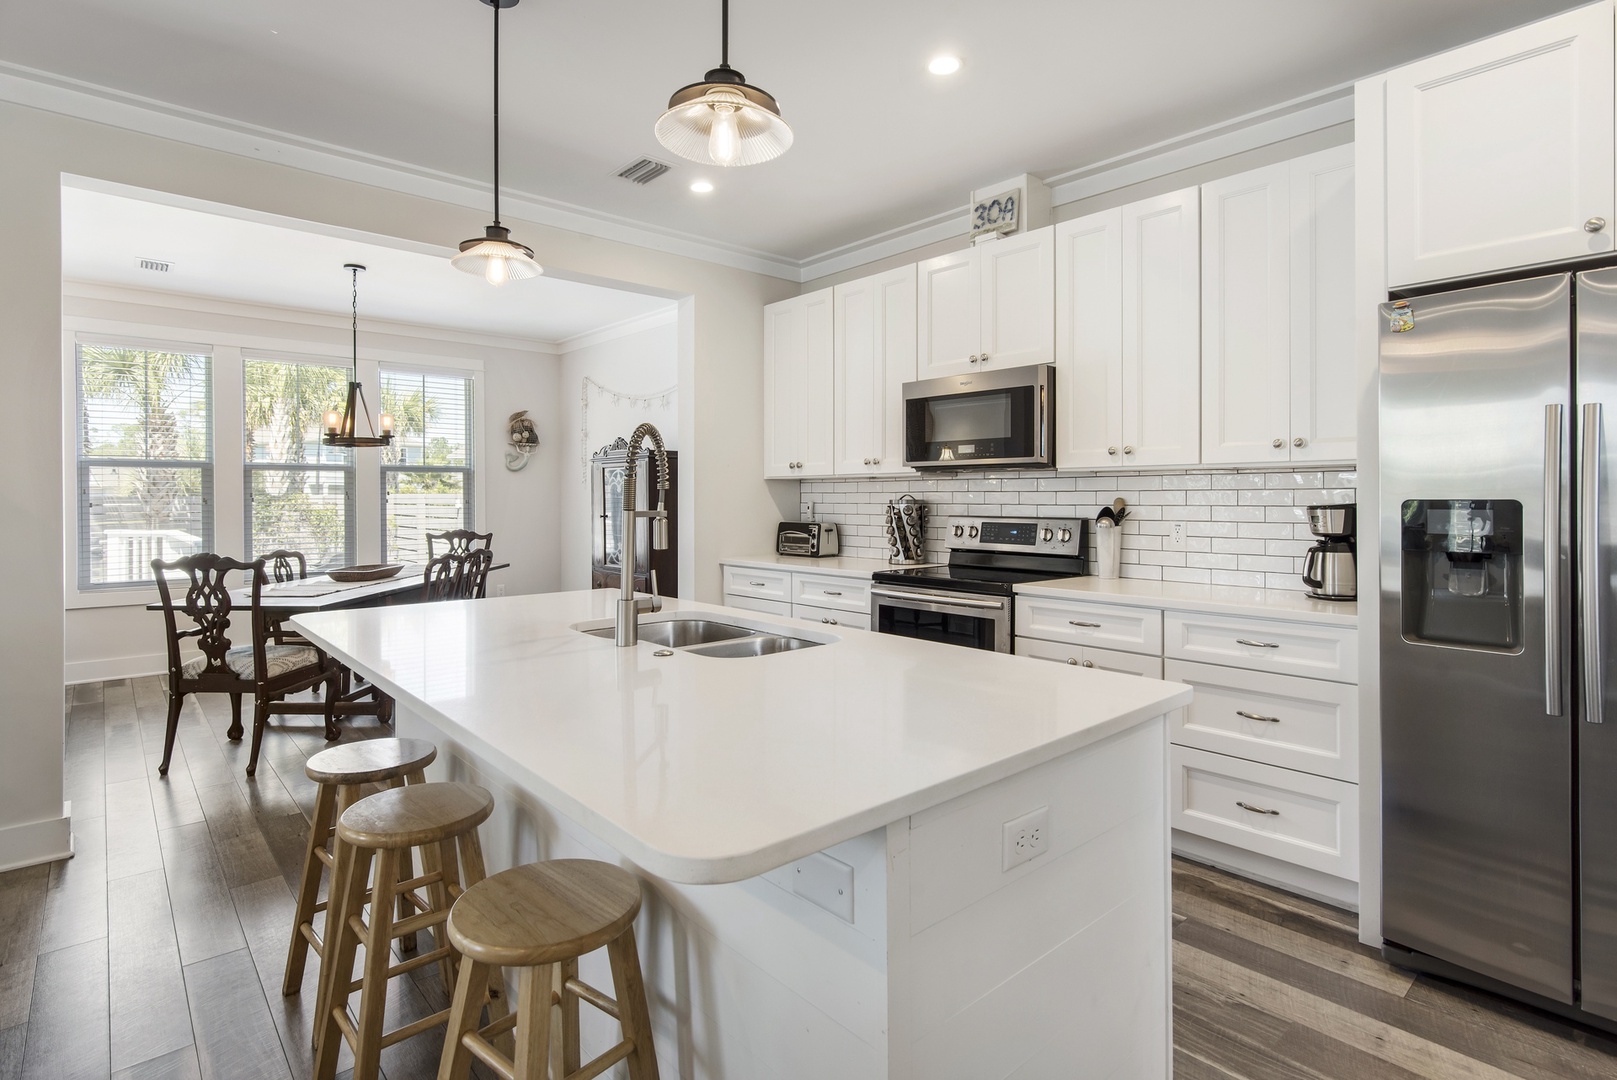 The well-stocked kitchen features light and bright finishes!